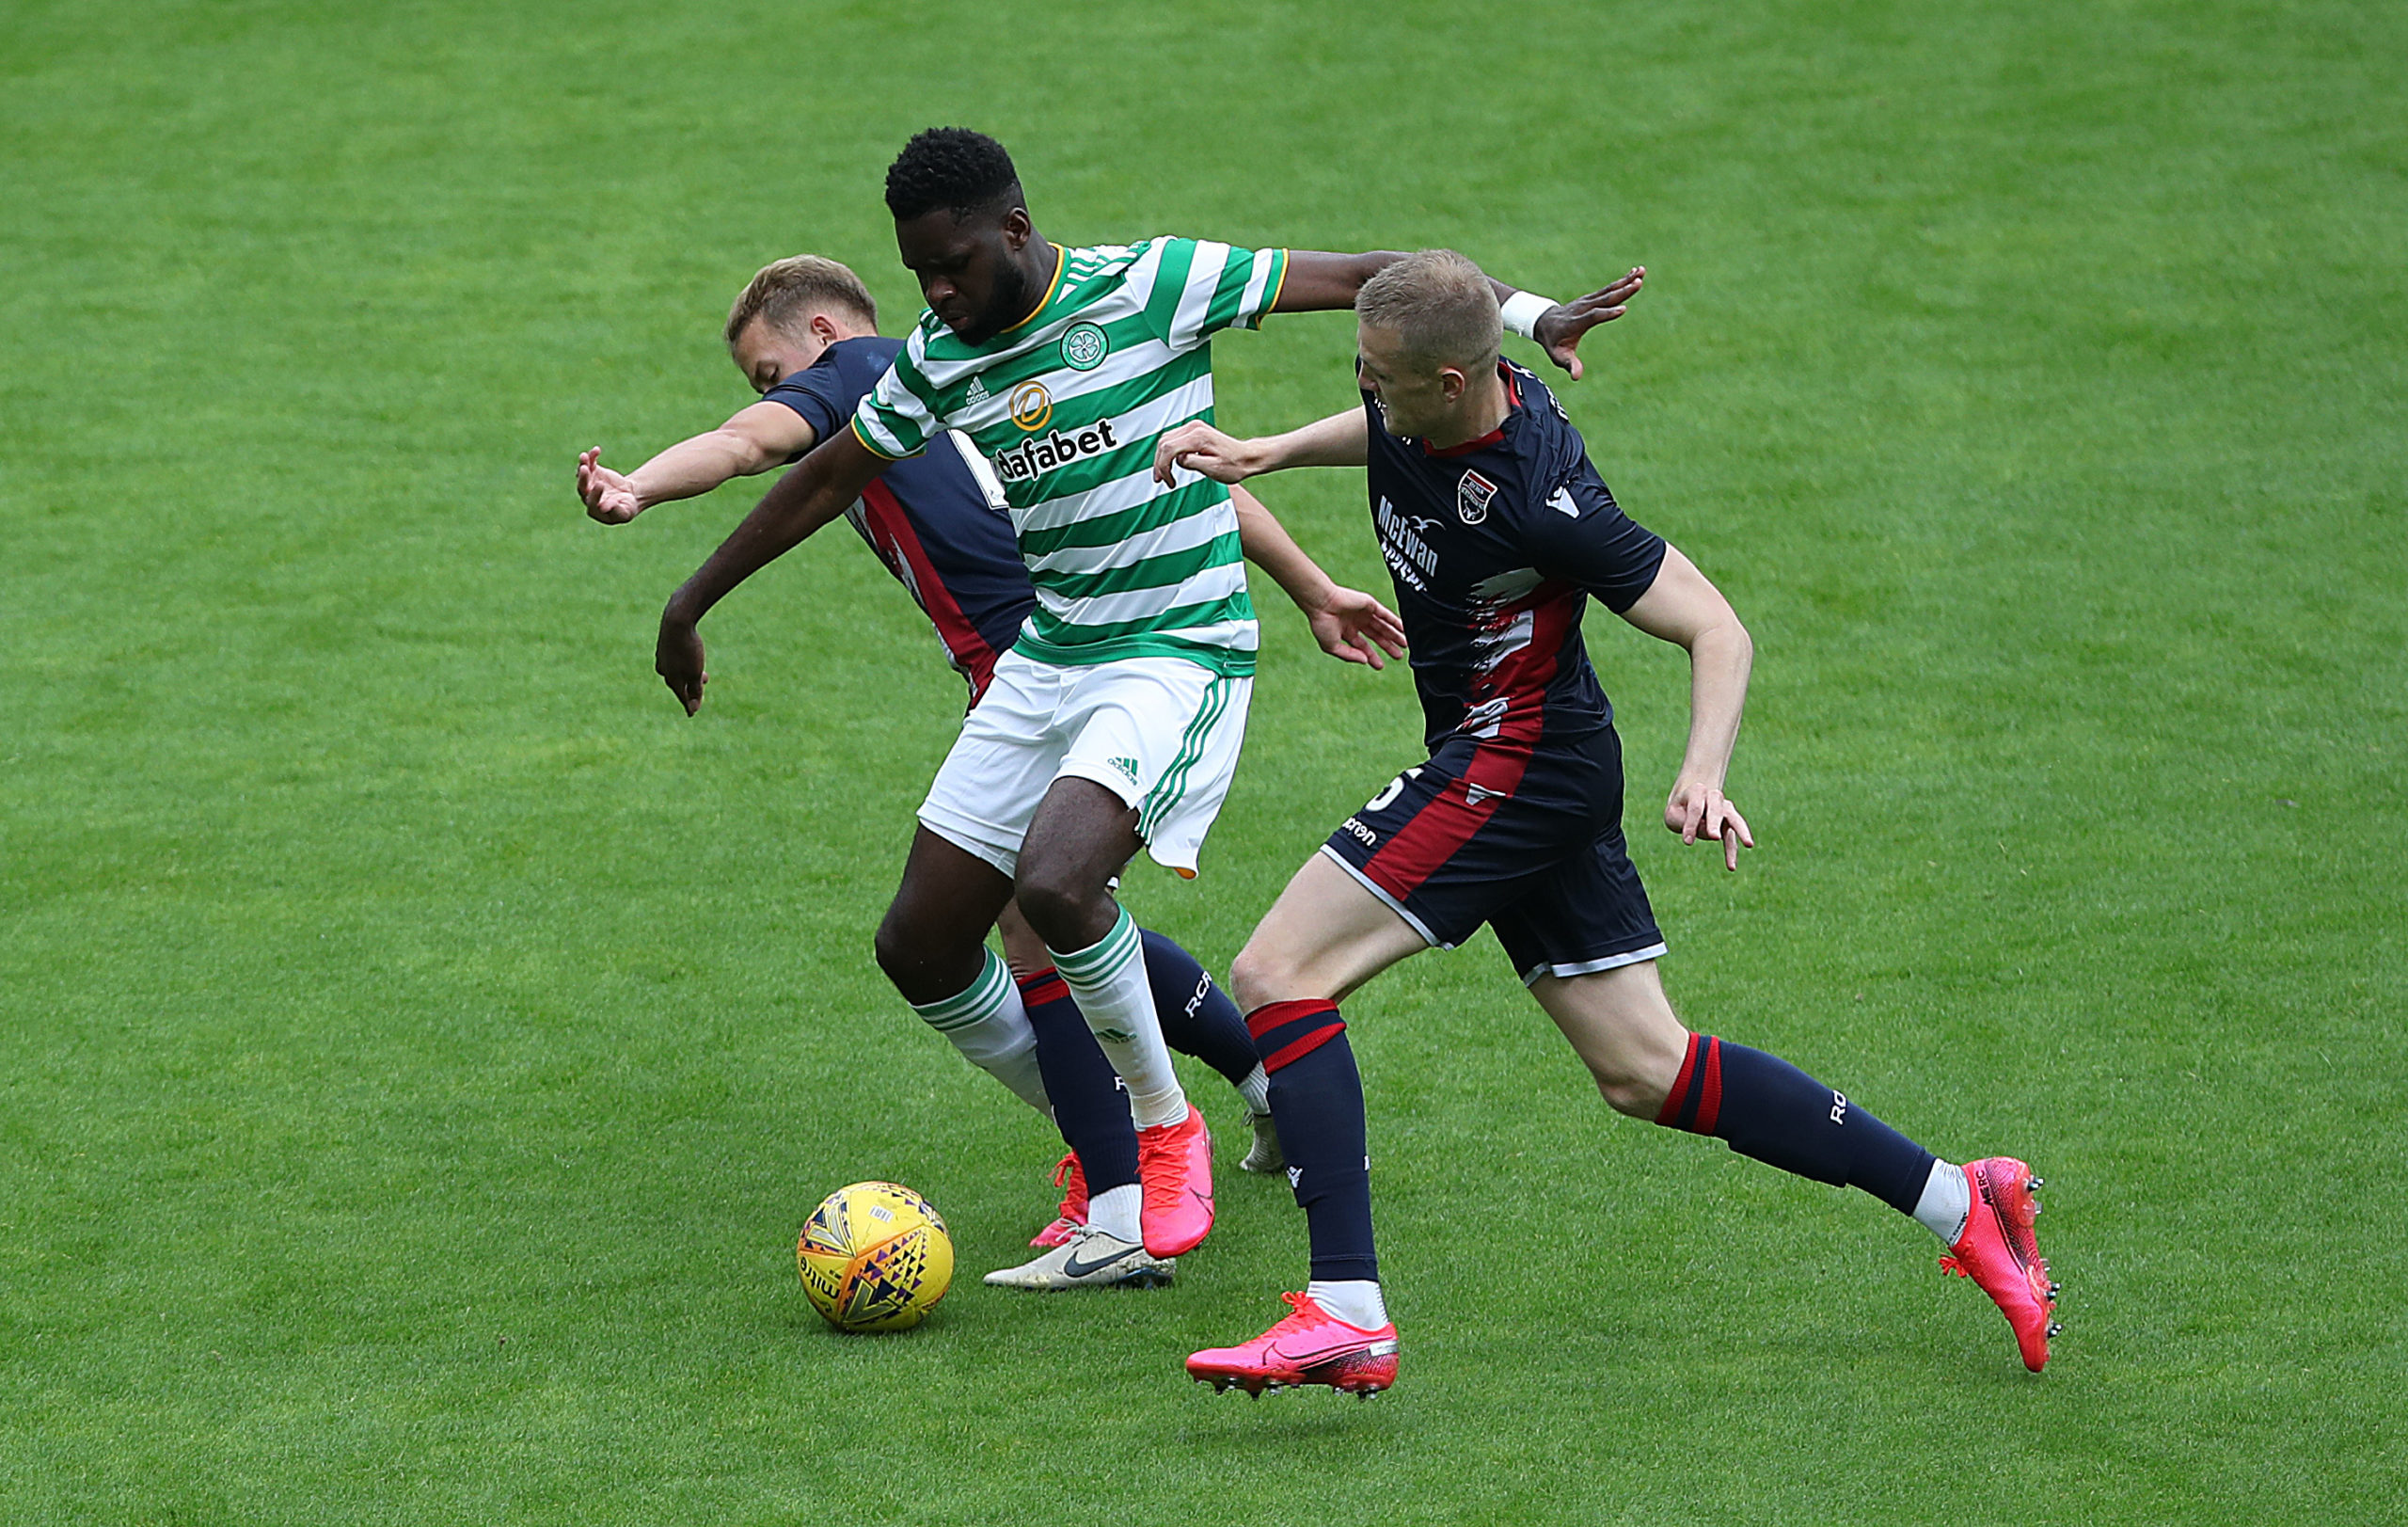 Celtic taking on Ross County behind closed doors in July